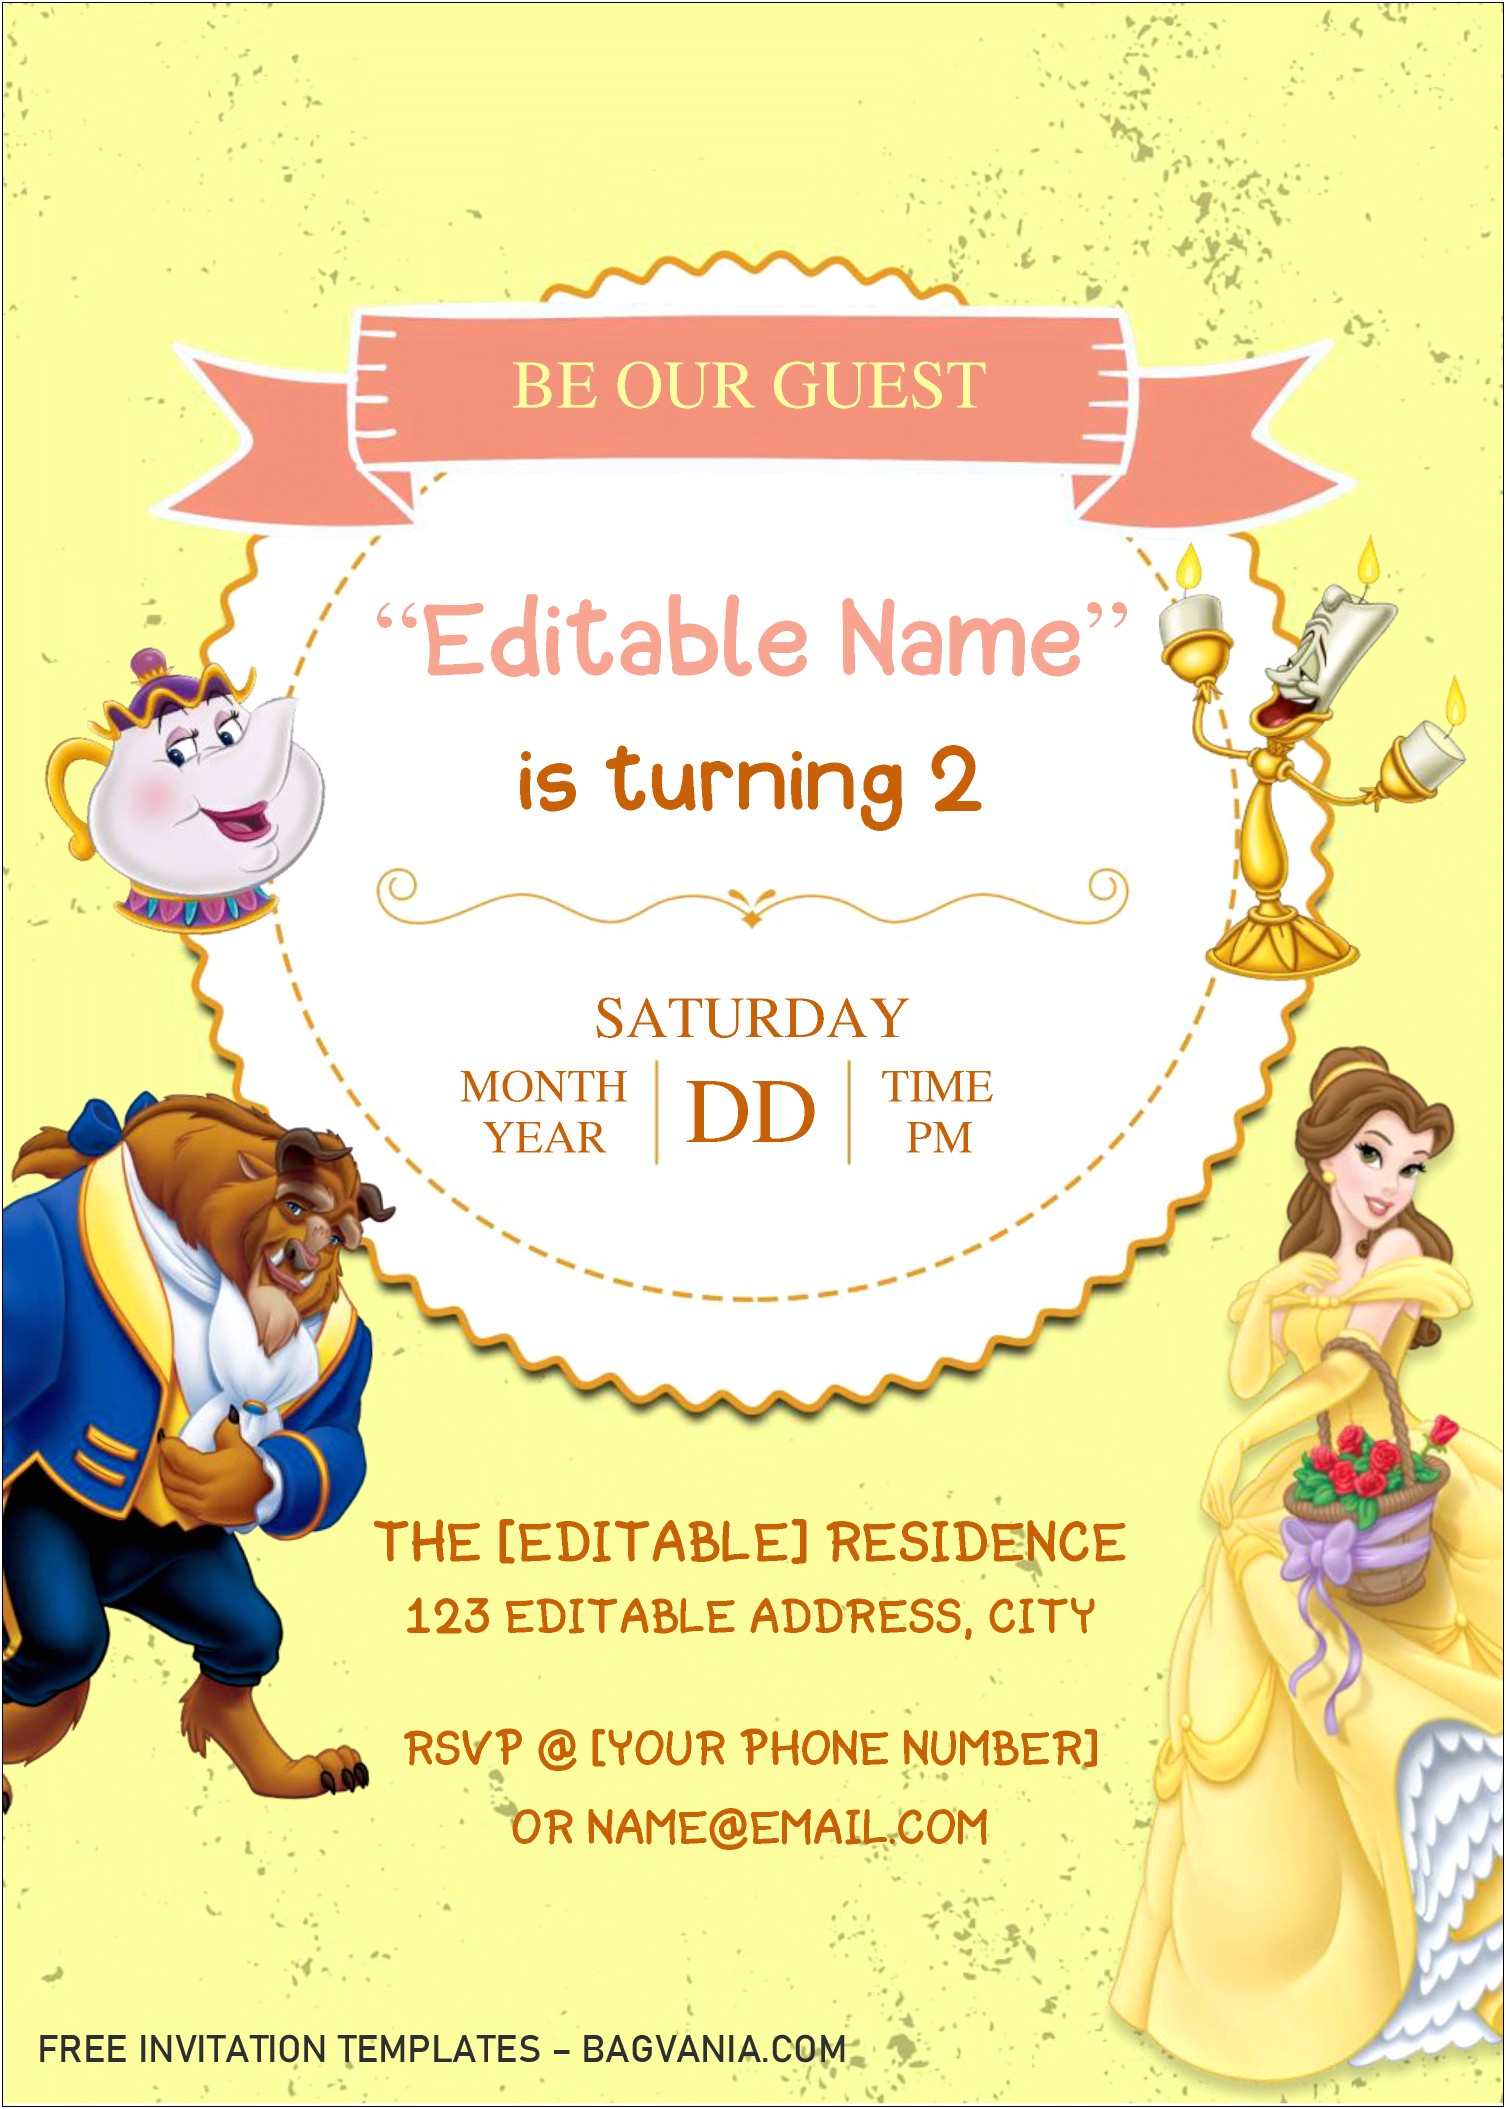 Be Our Guest Wedding Shower Invitations